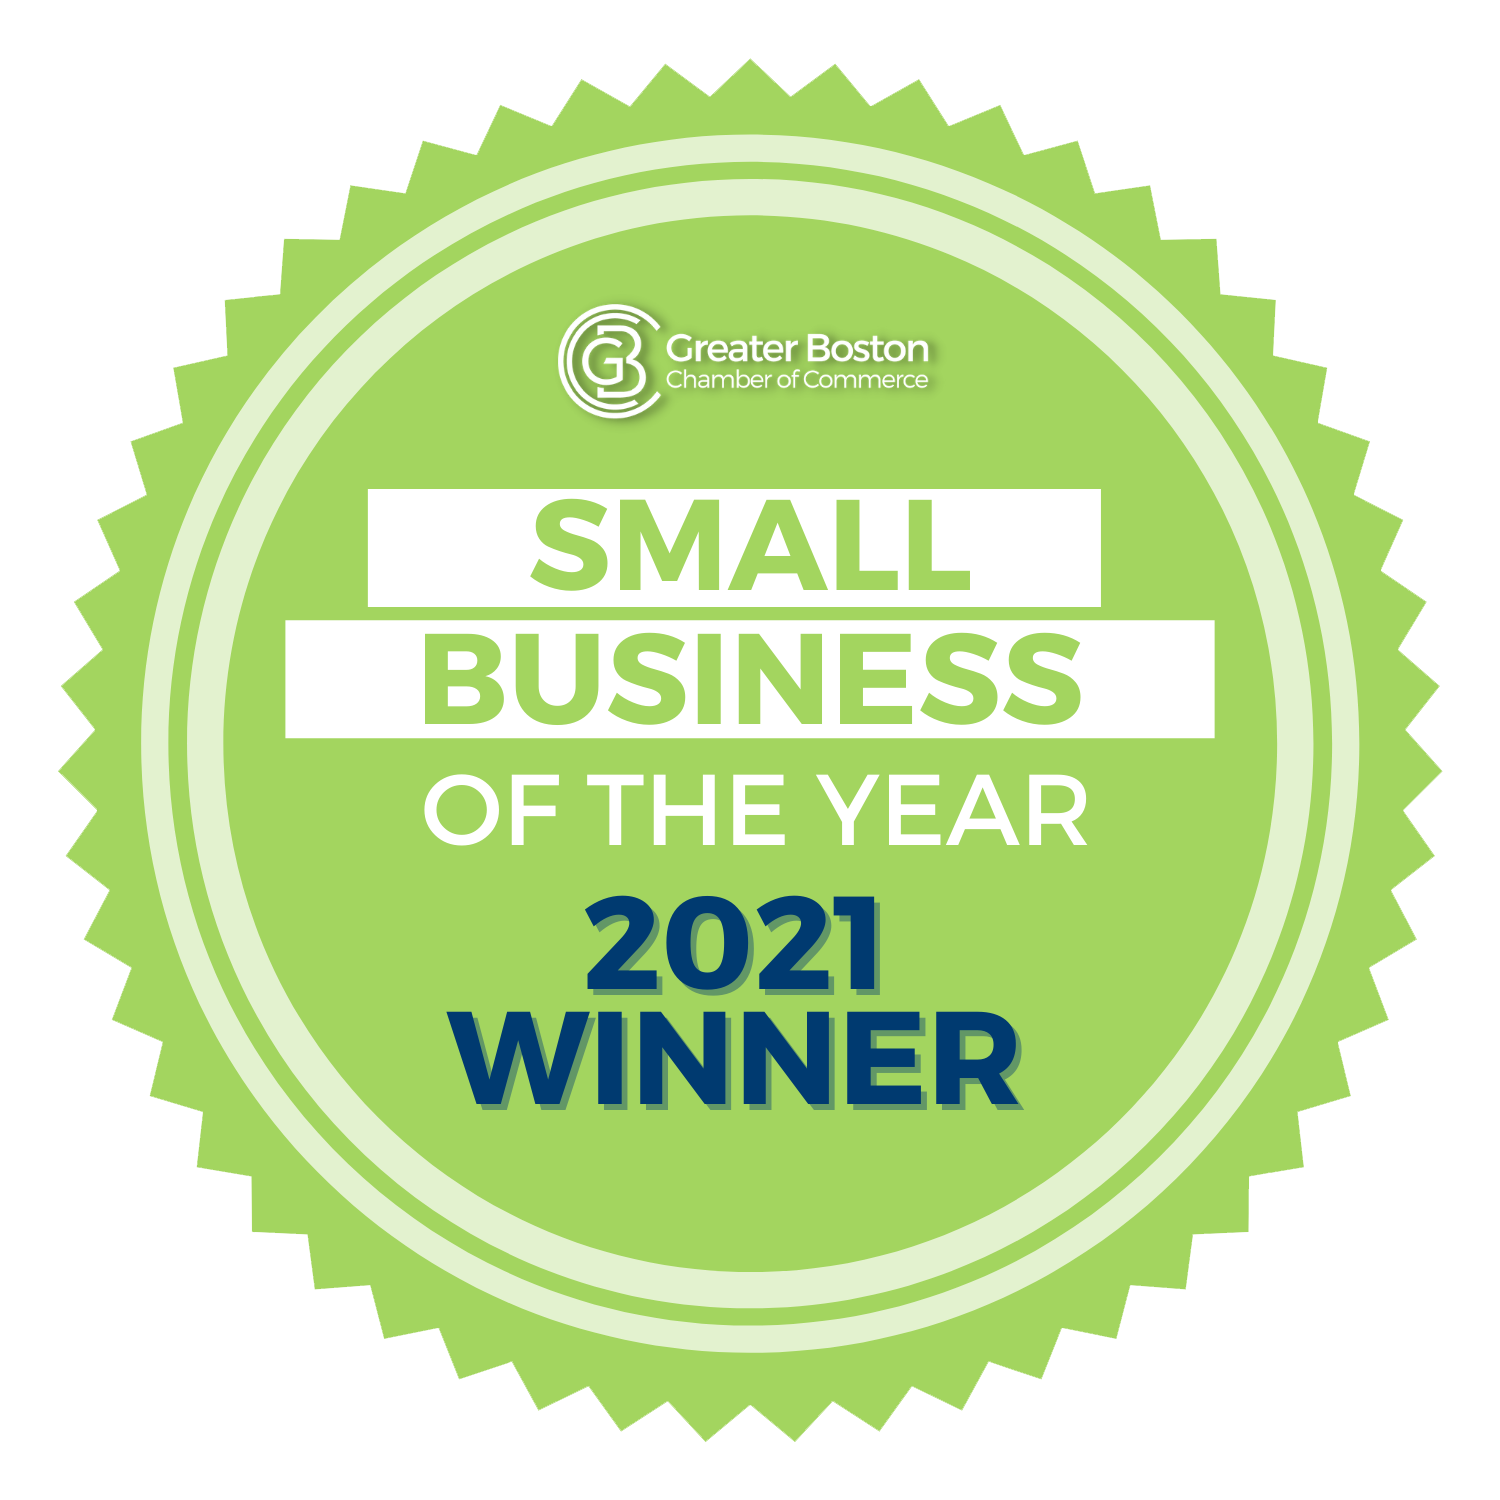 Greater Boston Chamber of Commerce Small Business of the Year 2021 Winner